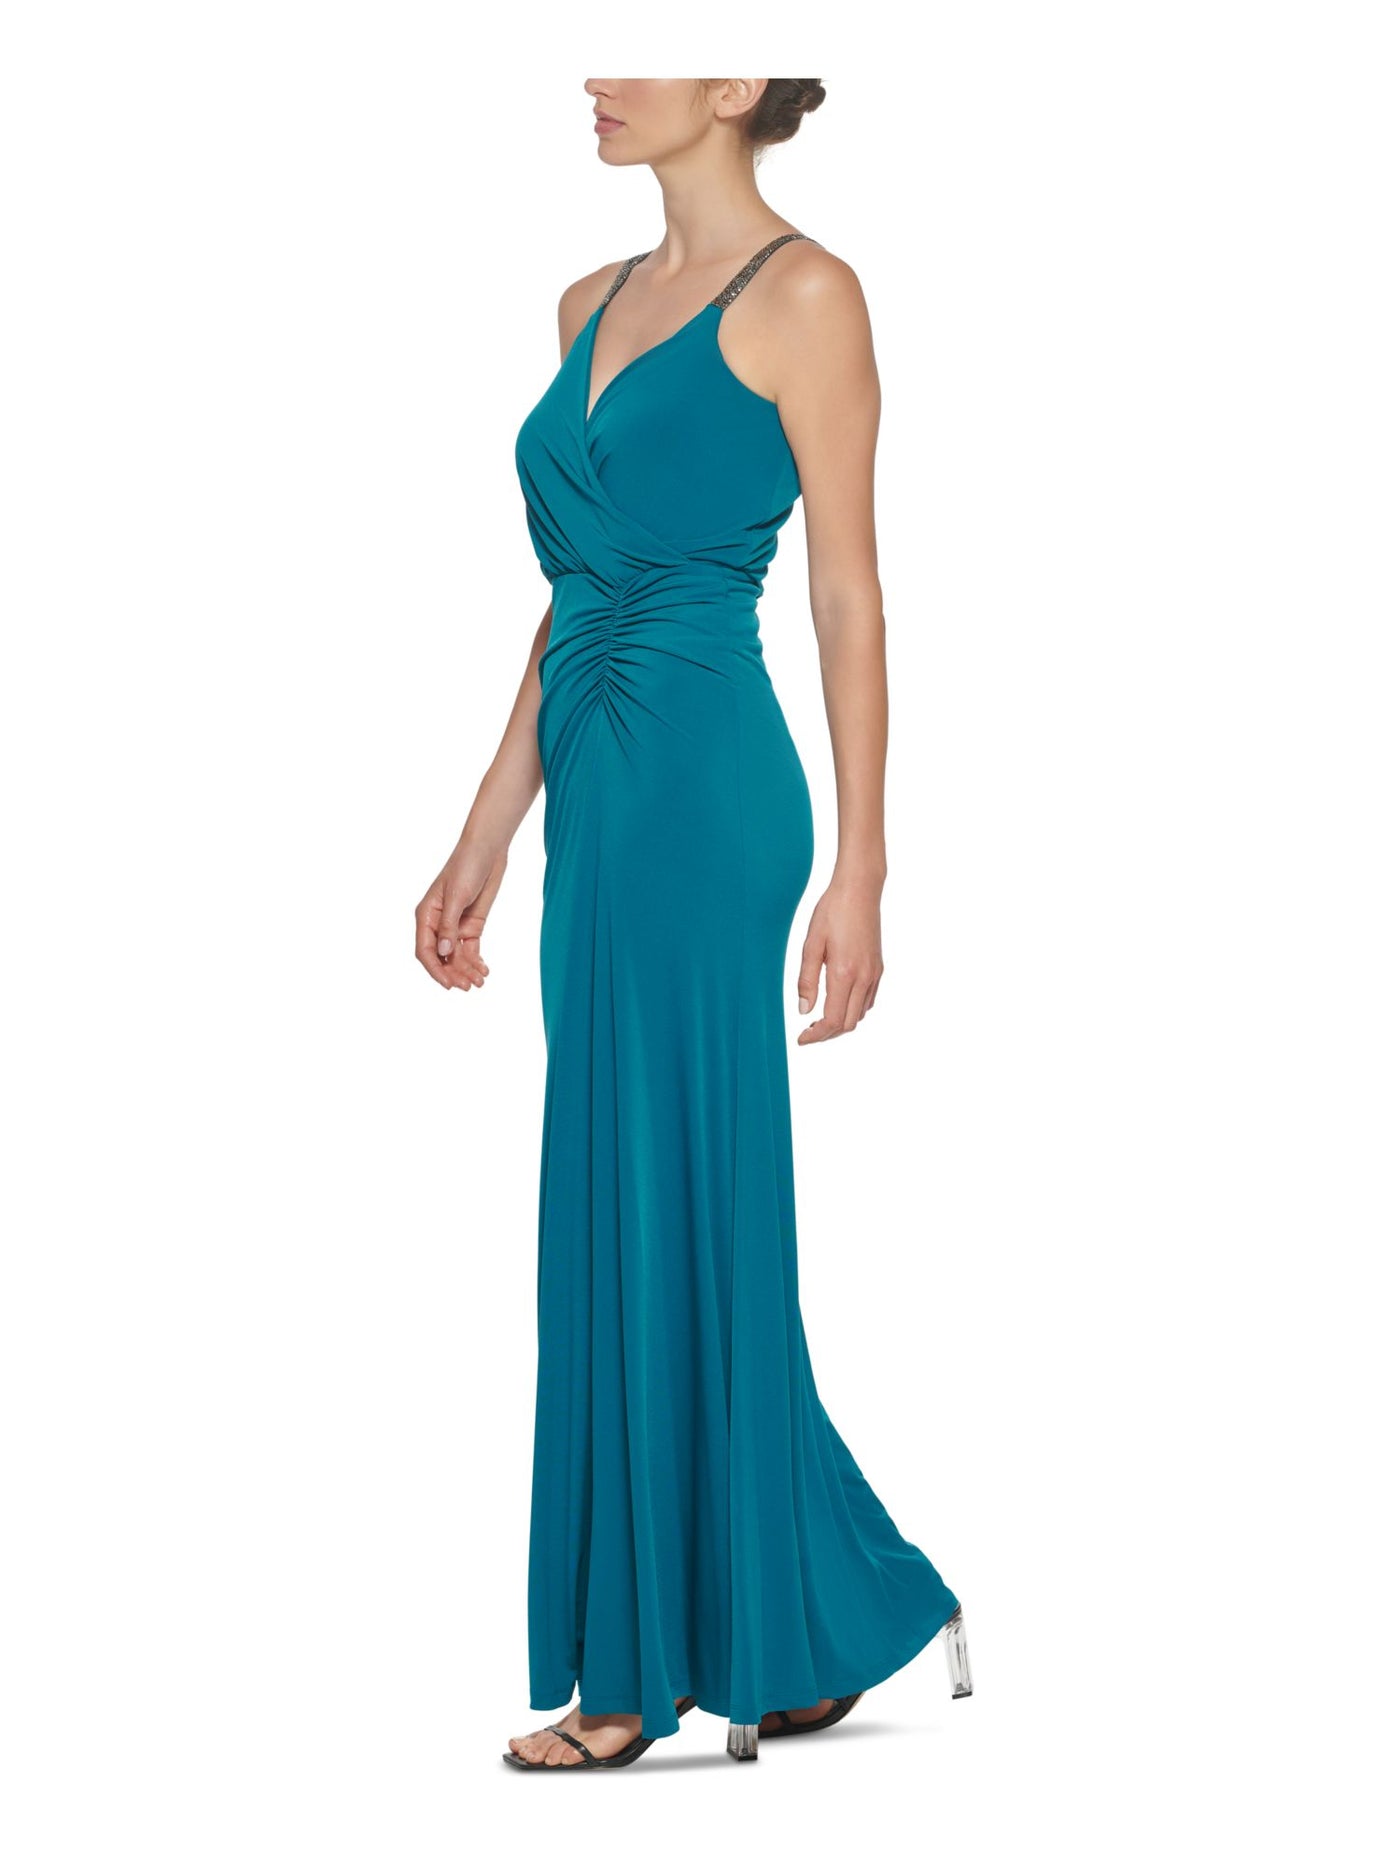 CALVIN KLEIN Womens Teal Stretch Ruched Zippered Embellished Straps Jersey-knit Spaghetti Strap Surplice Neckline Full-Length Cocktail Gown Dress 10